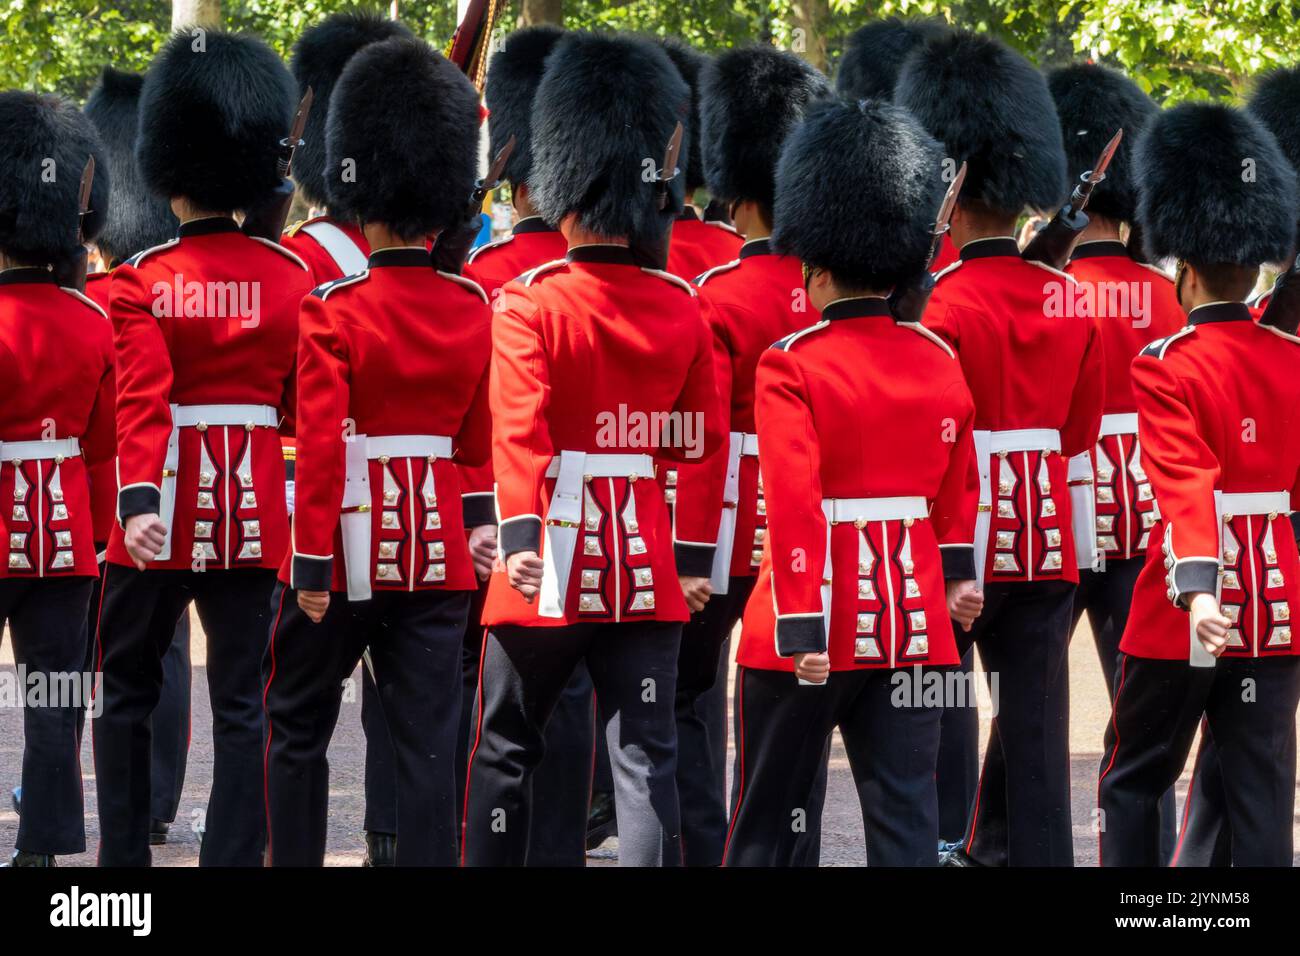 Queen royal british guards in red uniforms during guards changing parade on the Mall in London UK Stock Photo